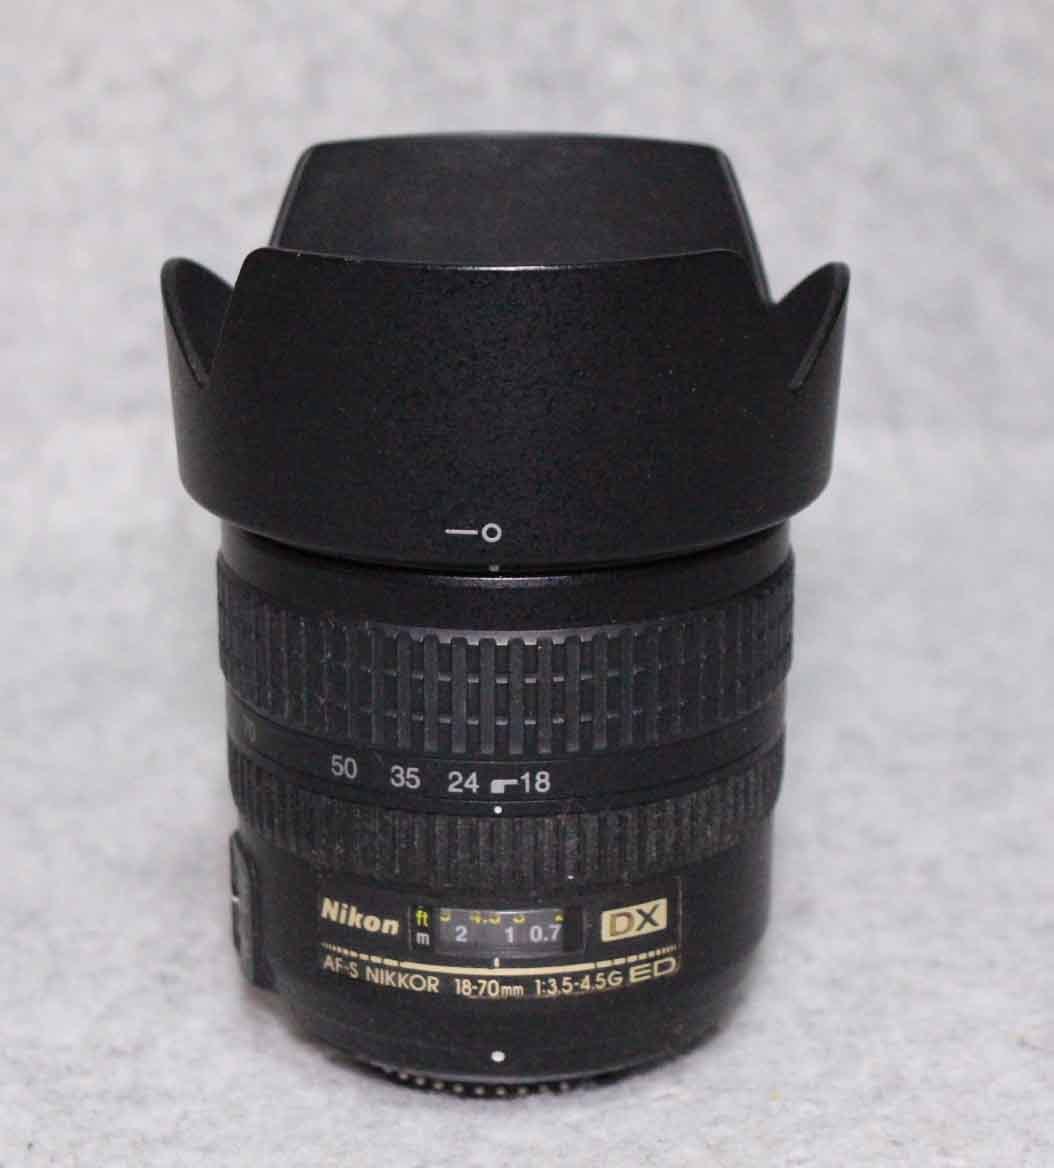 [is76]ニコン レンズフード HB-32 Nikon rens hood 純正 AF-S DX ED 18-70mmG用 AF-S DX 18-105mmG、の画像5